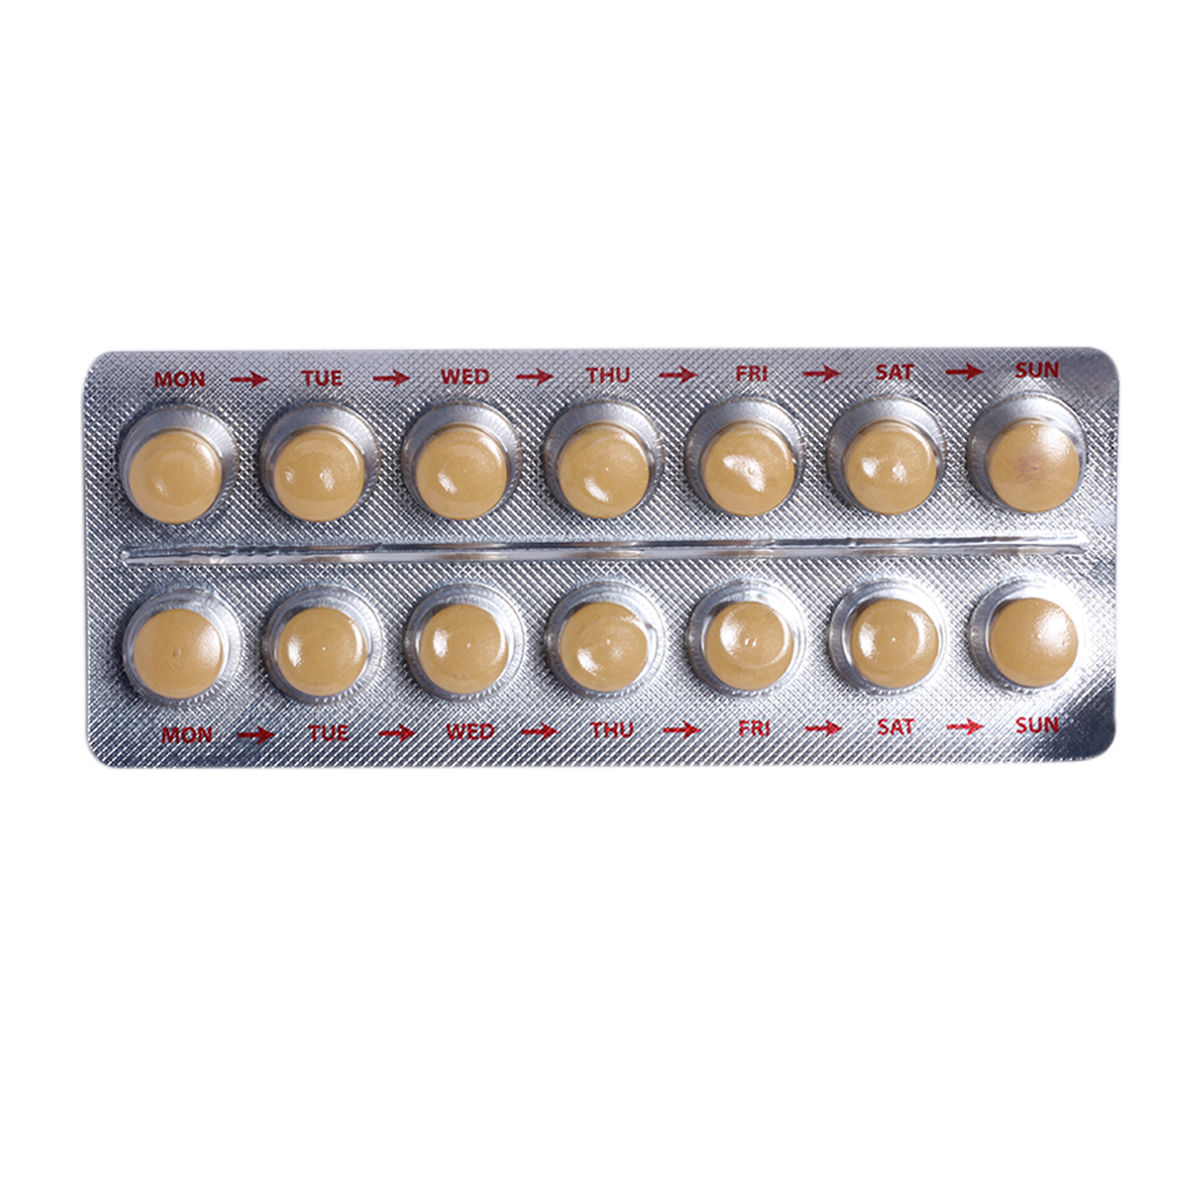 O Glimaday-Forte 2/1000mg Tablet 14's, Pack of 14 TABLETS